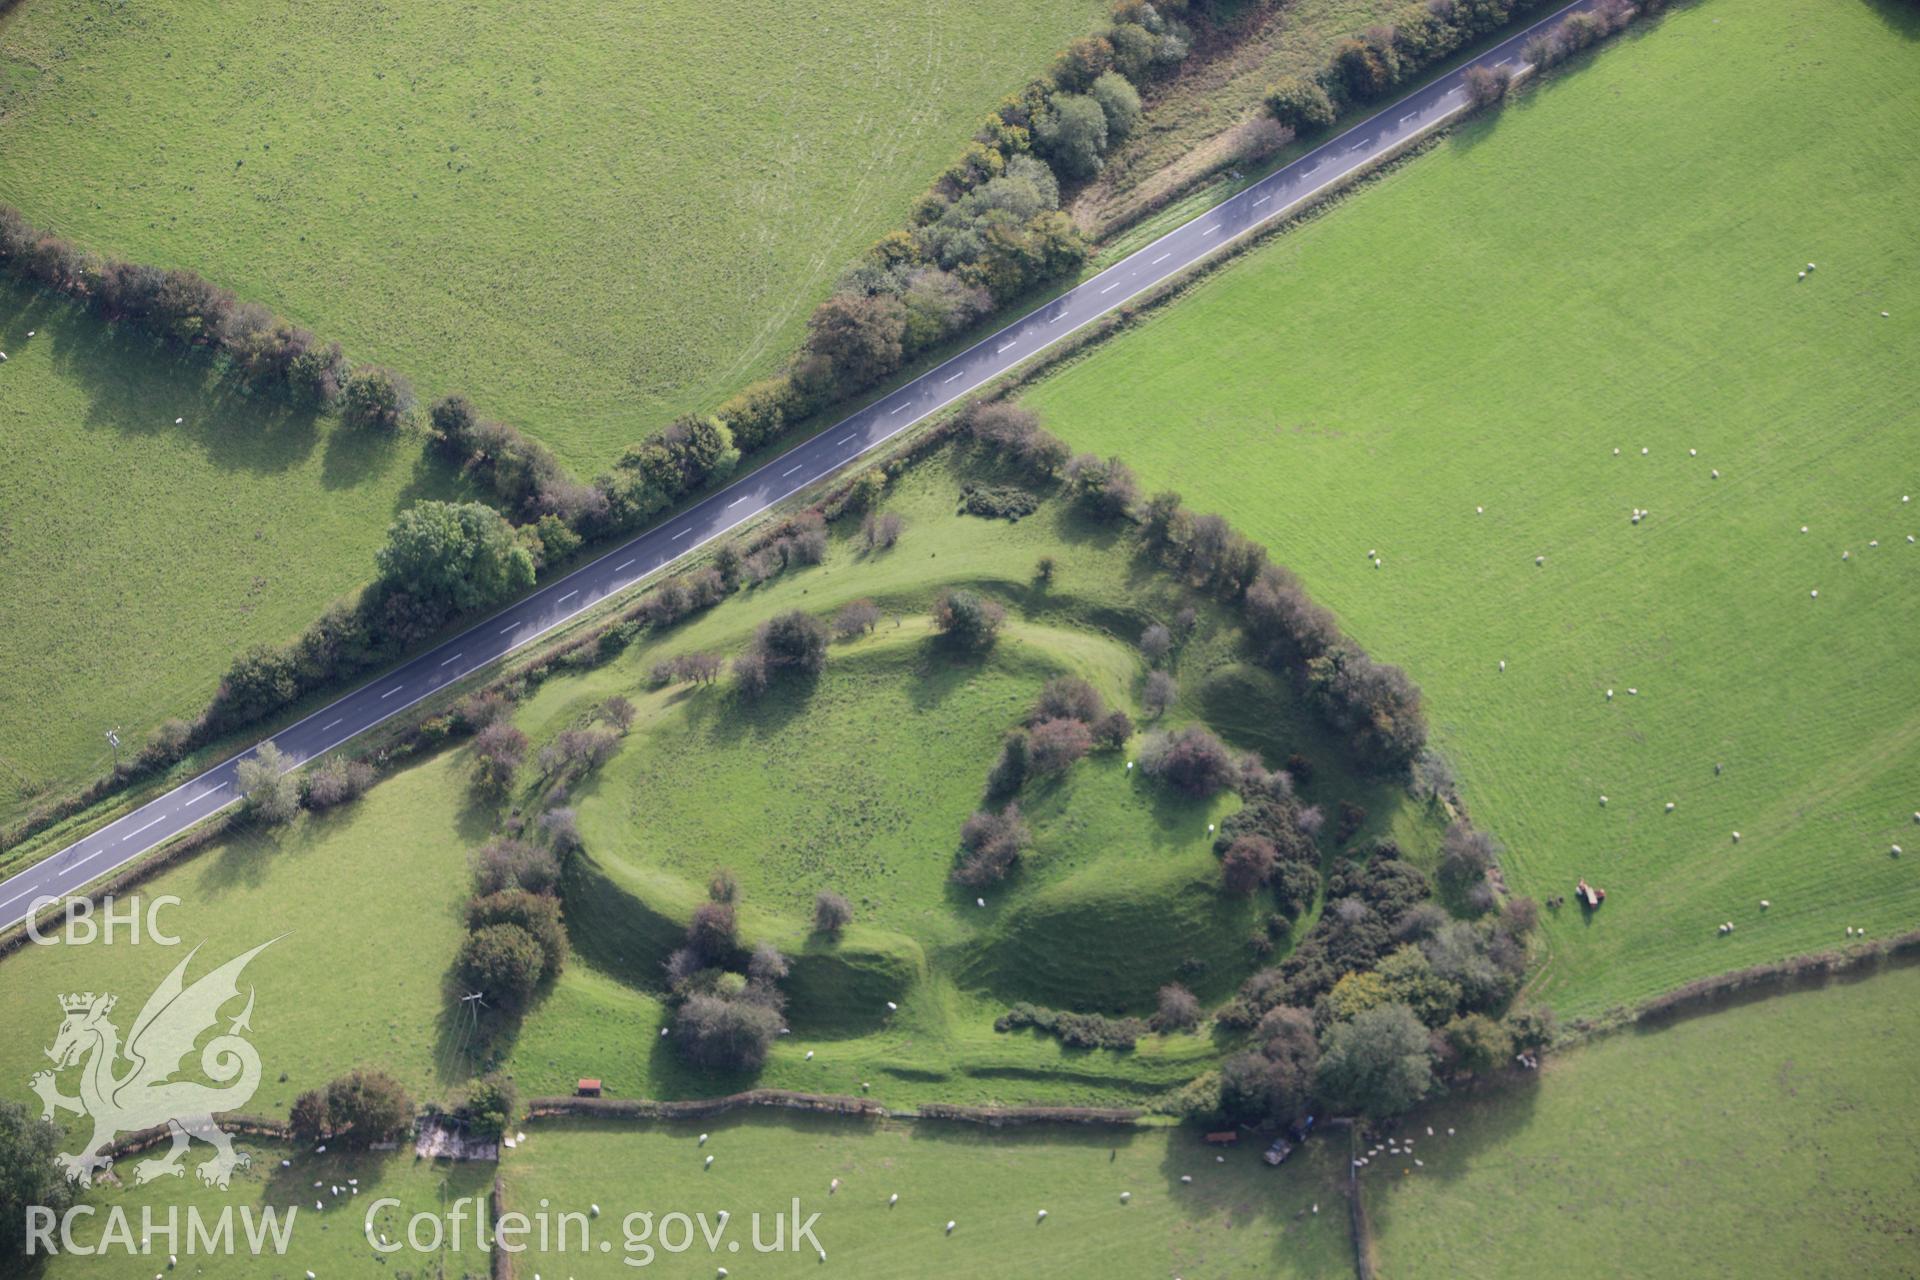 RCAHMW colour oblique aerial photograph of Tomen-y-Rhodwydd. Taken on 13 October 2009 by Toby Driver